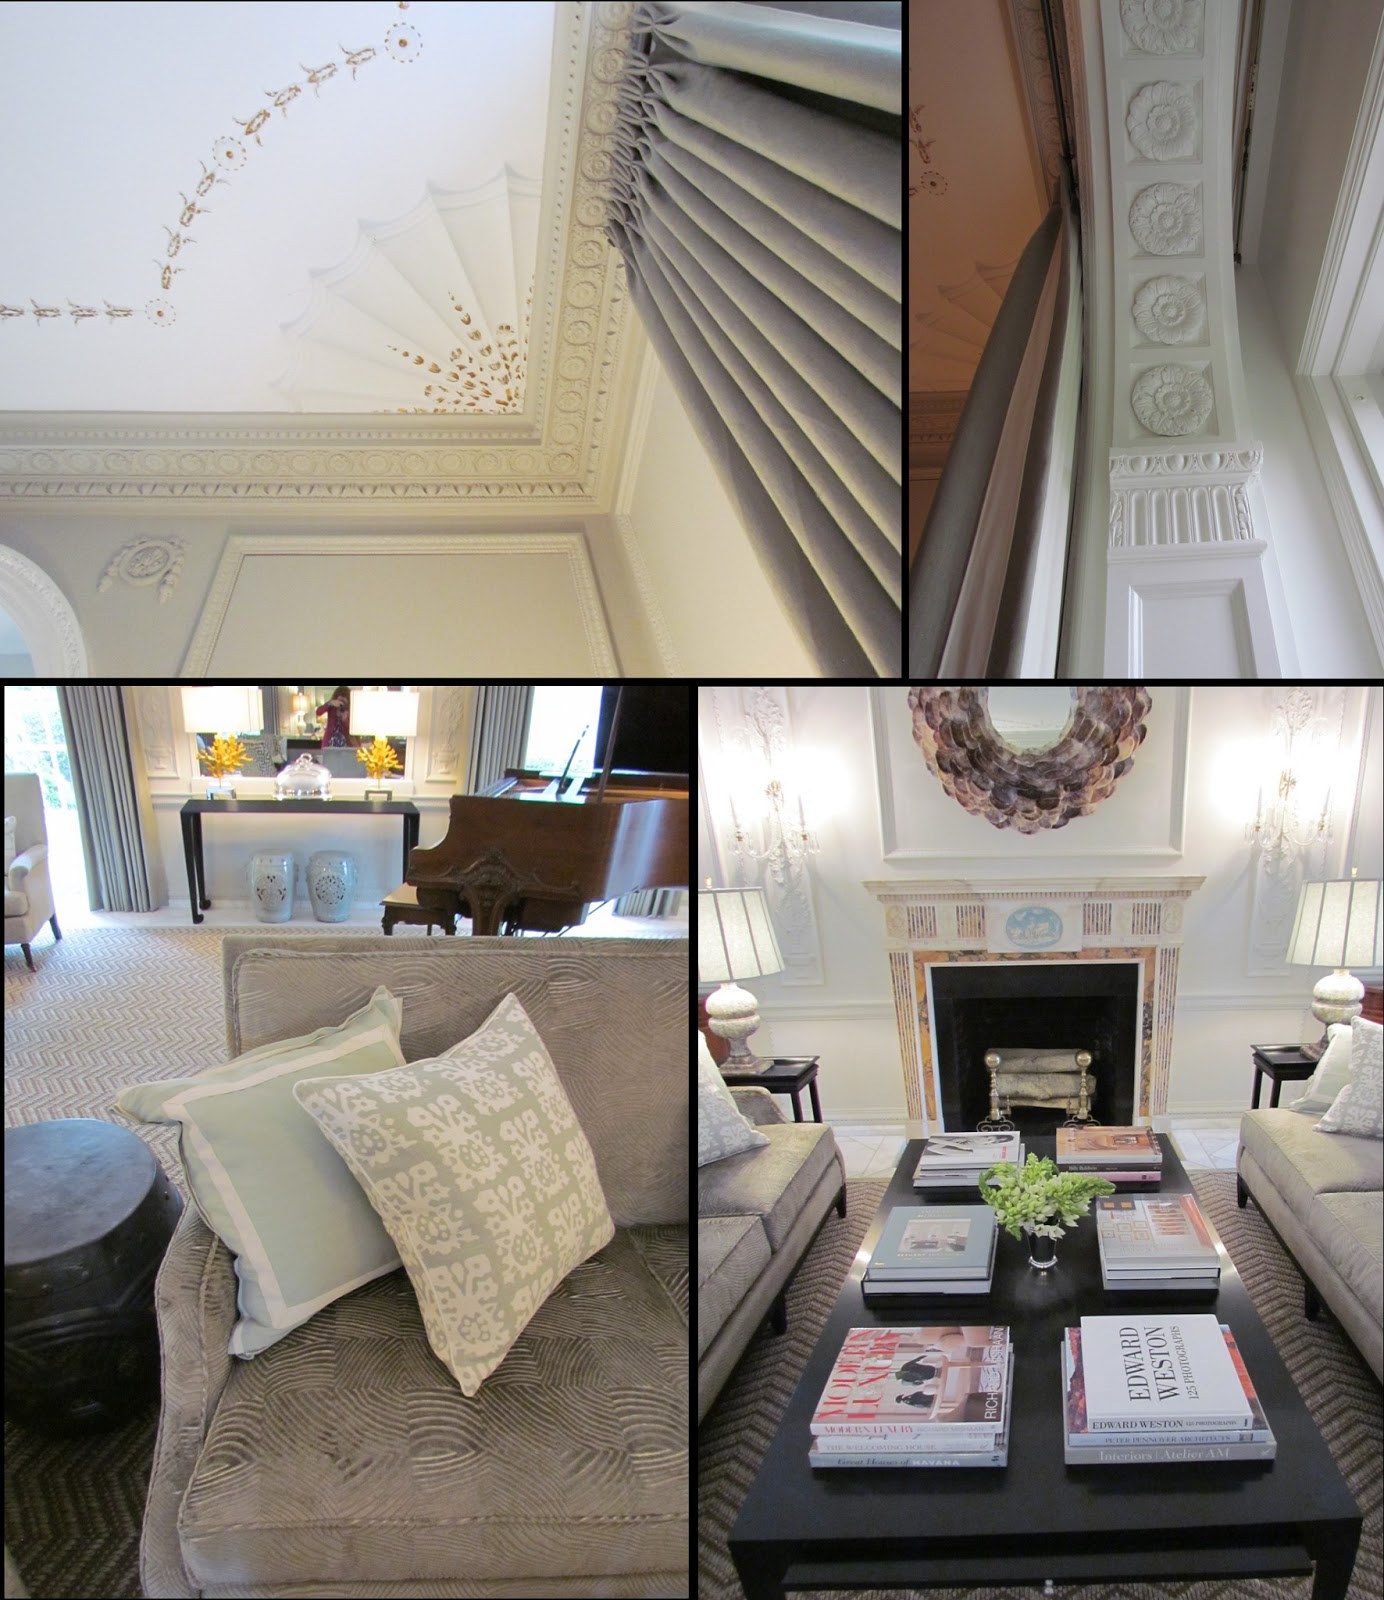 ... : Imagination @ Home: The Designer Showhouse of Westchester - Part 1